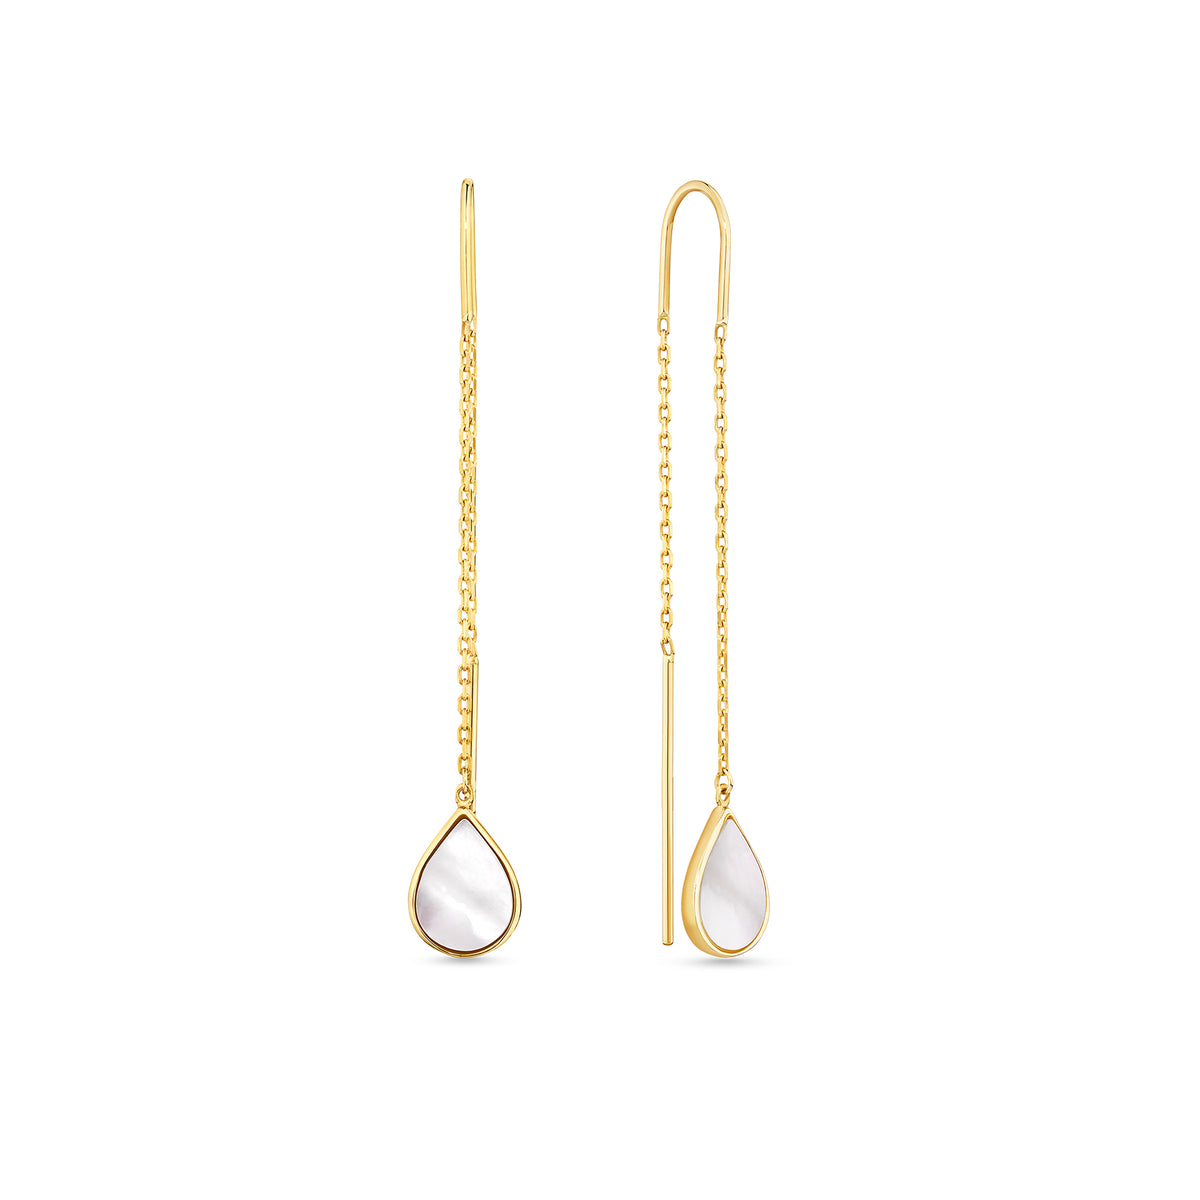 Mother of Pearl Threaded Pear Shape Earrings in 9ct Yellow Gold